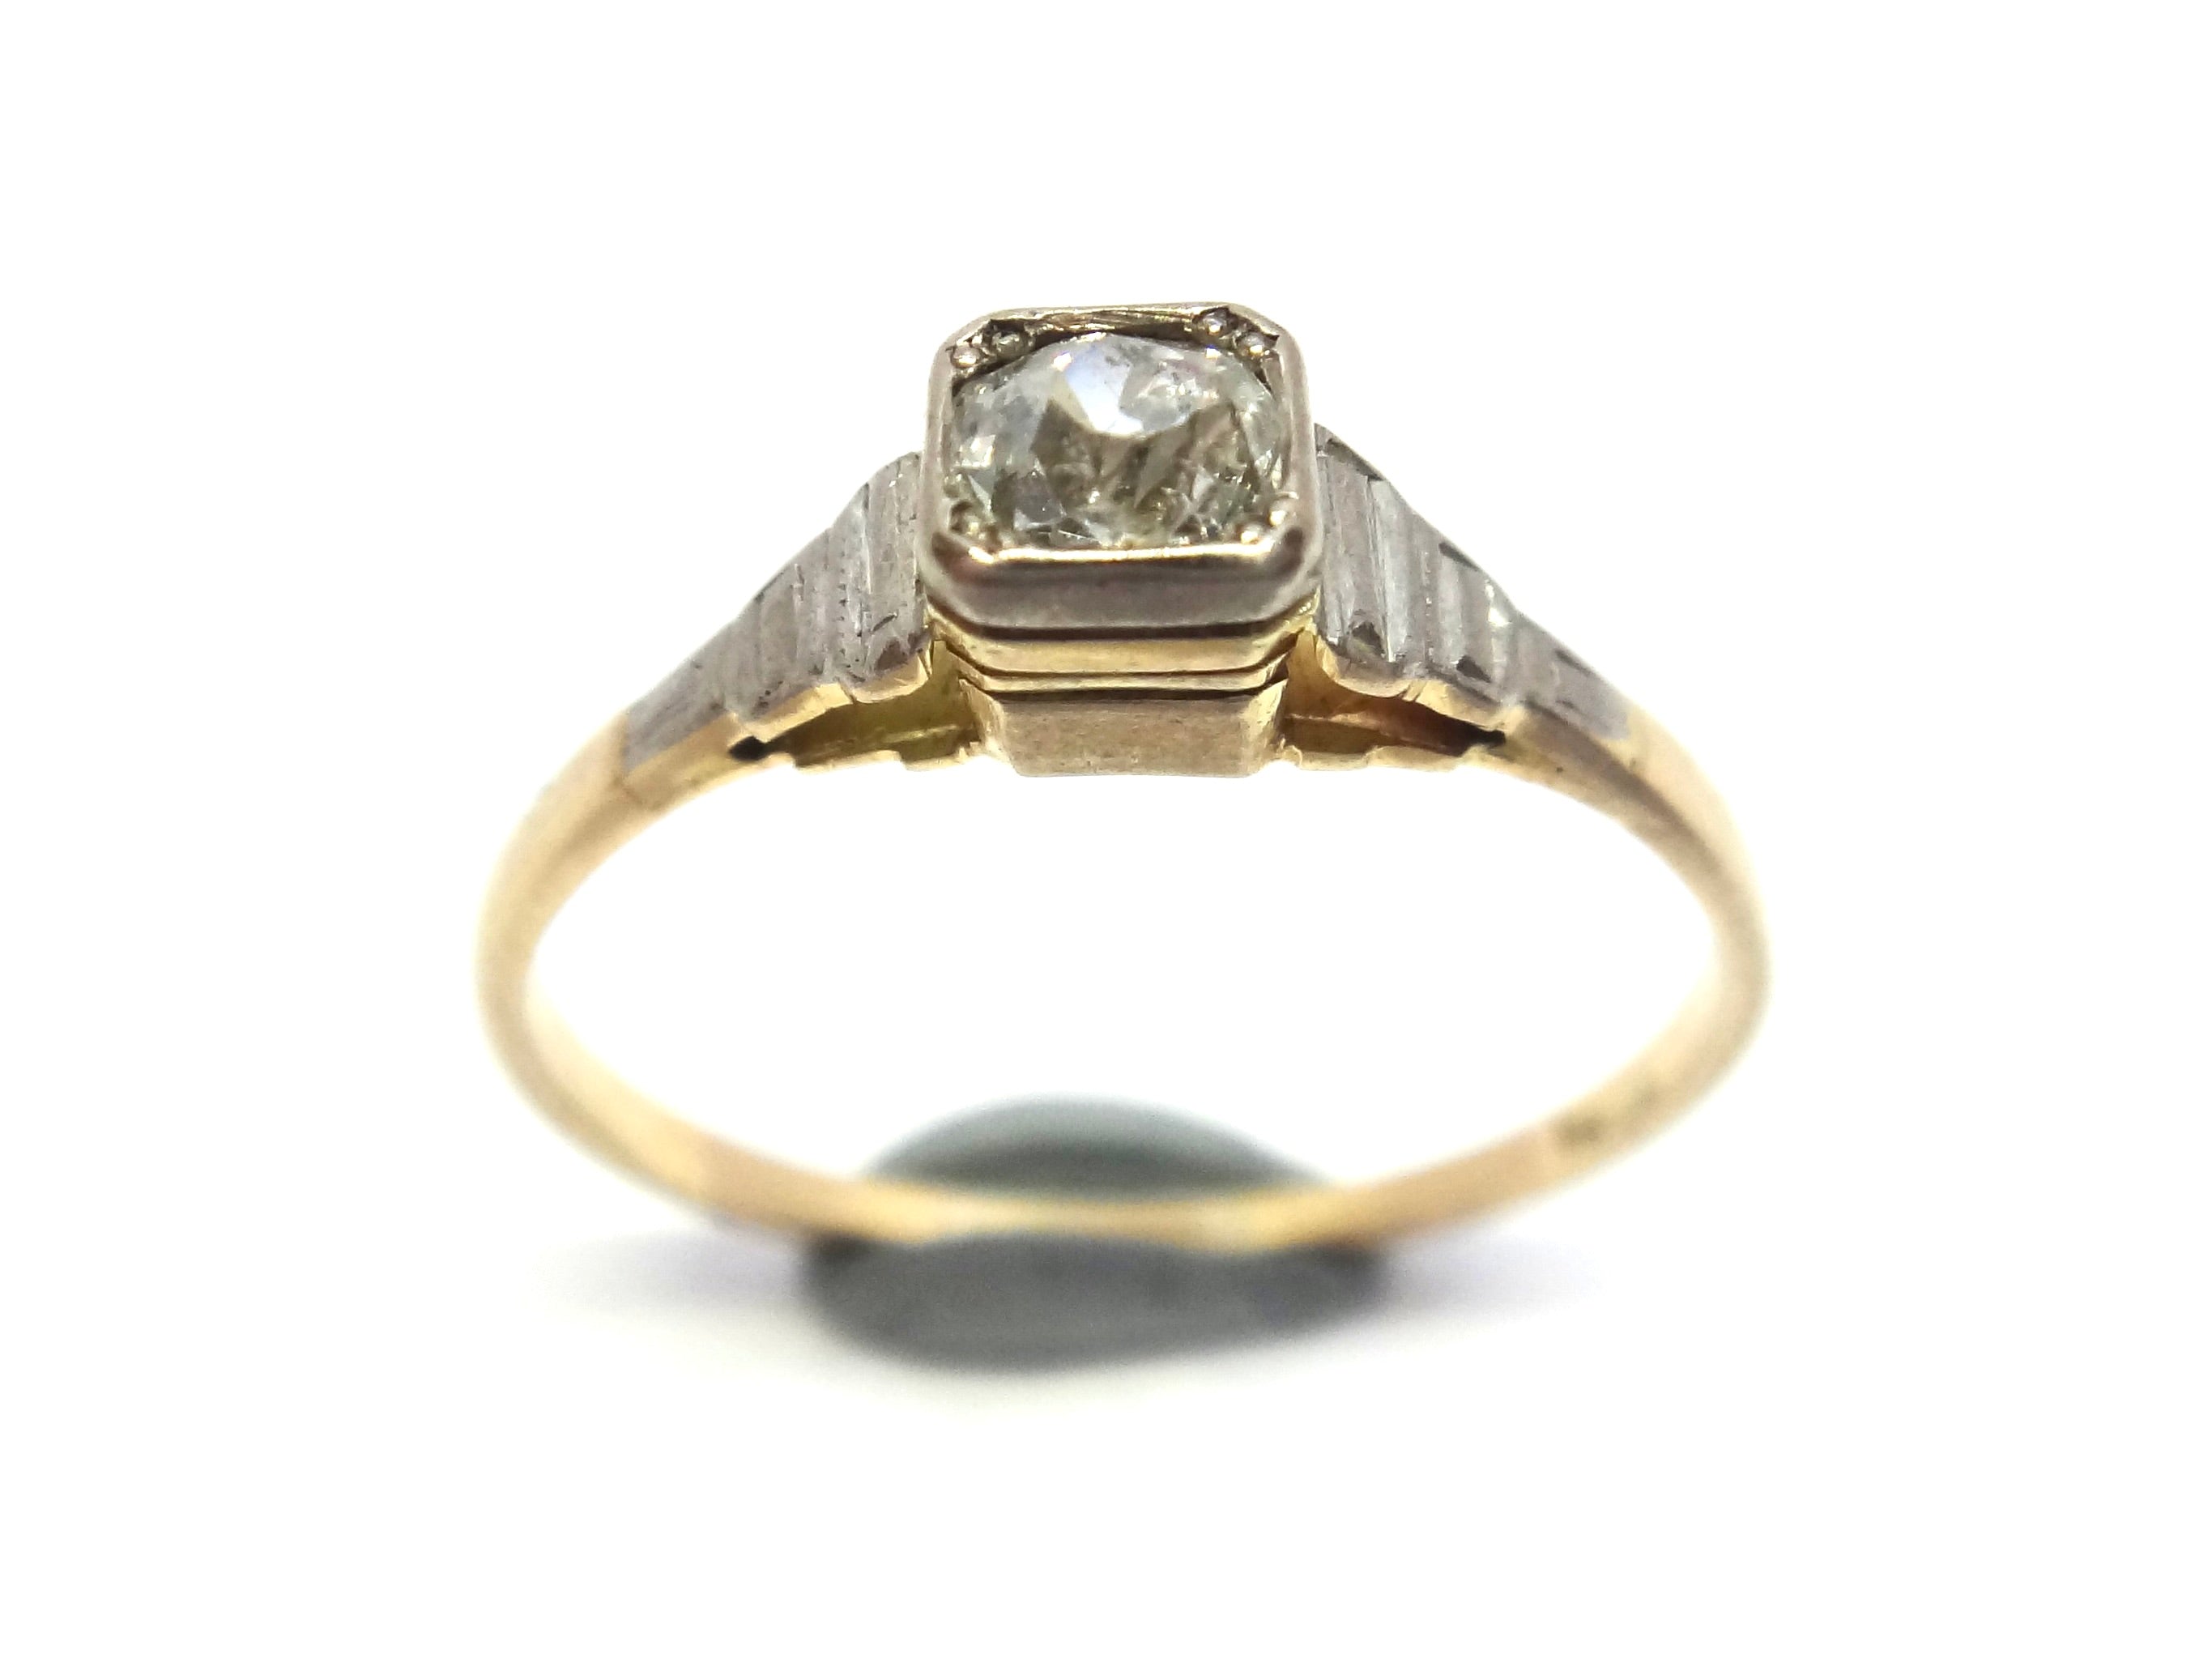 ANTIQUE 18ct Yellow Gold, Old Cut Diamond Ring